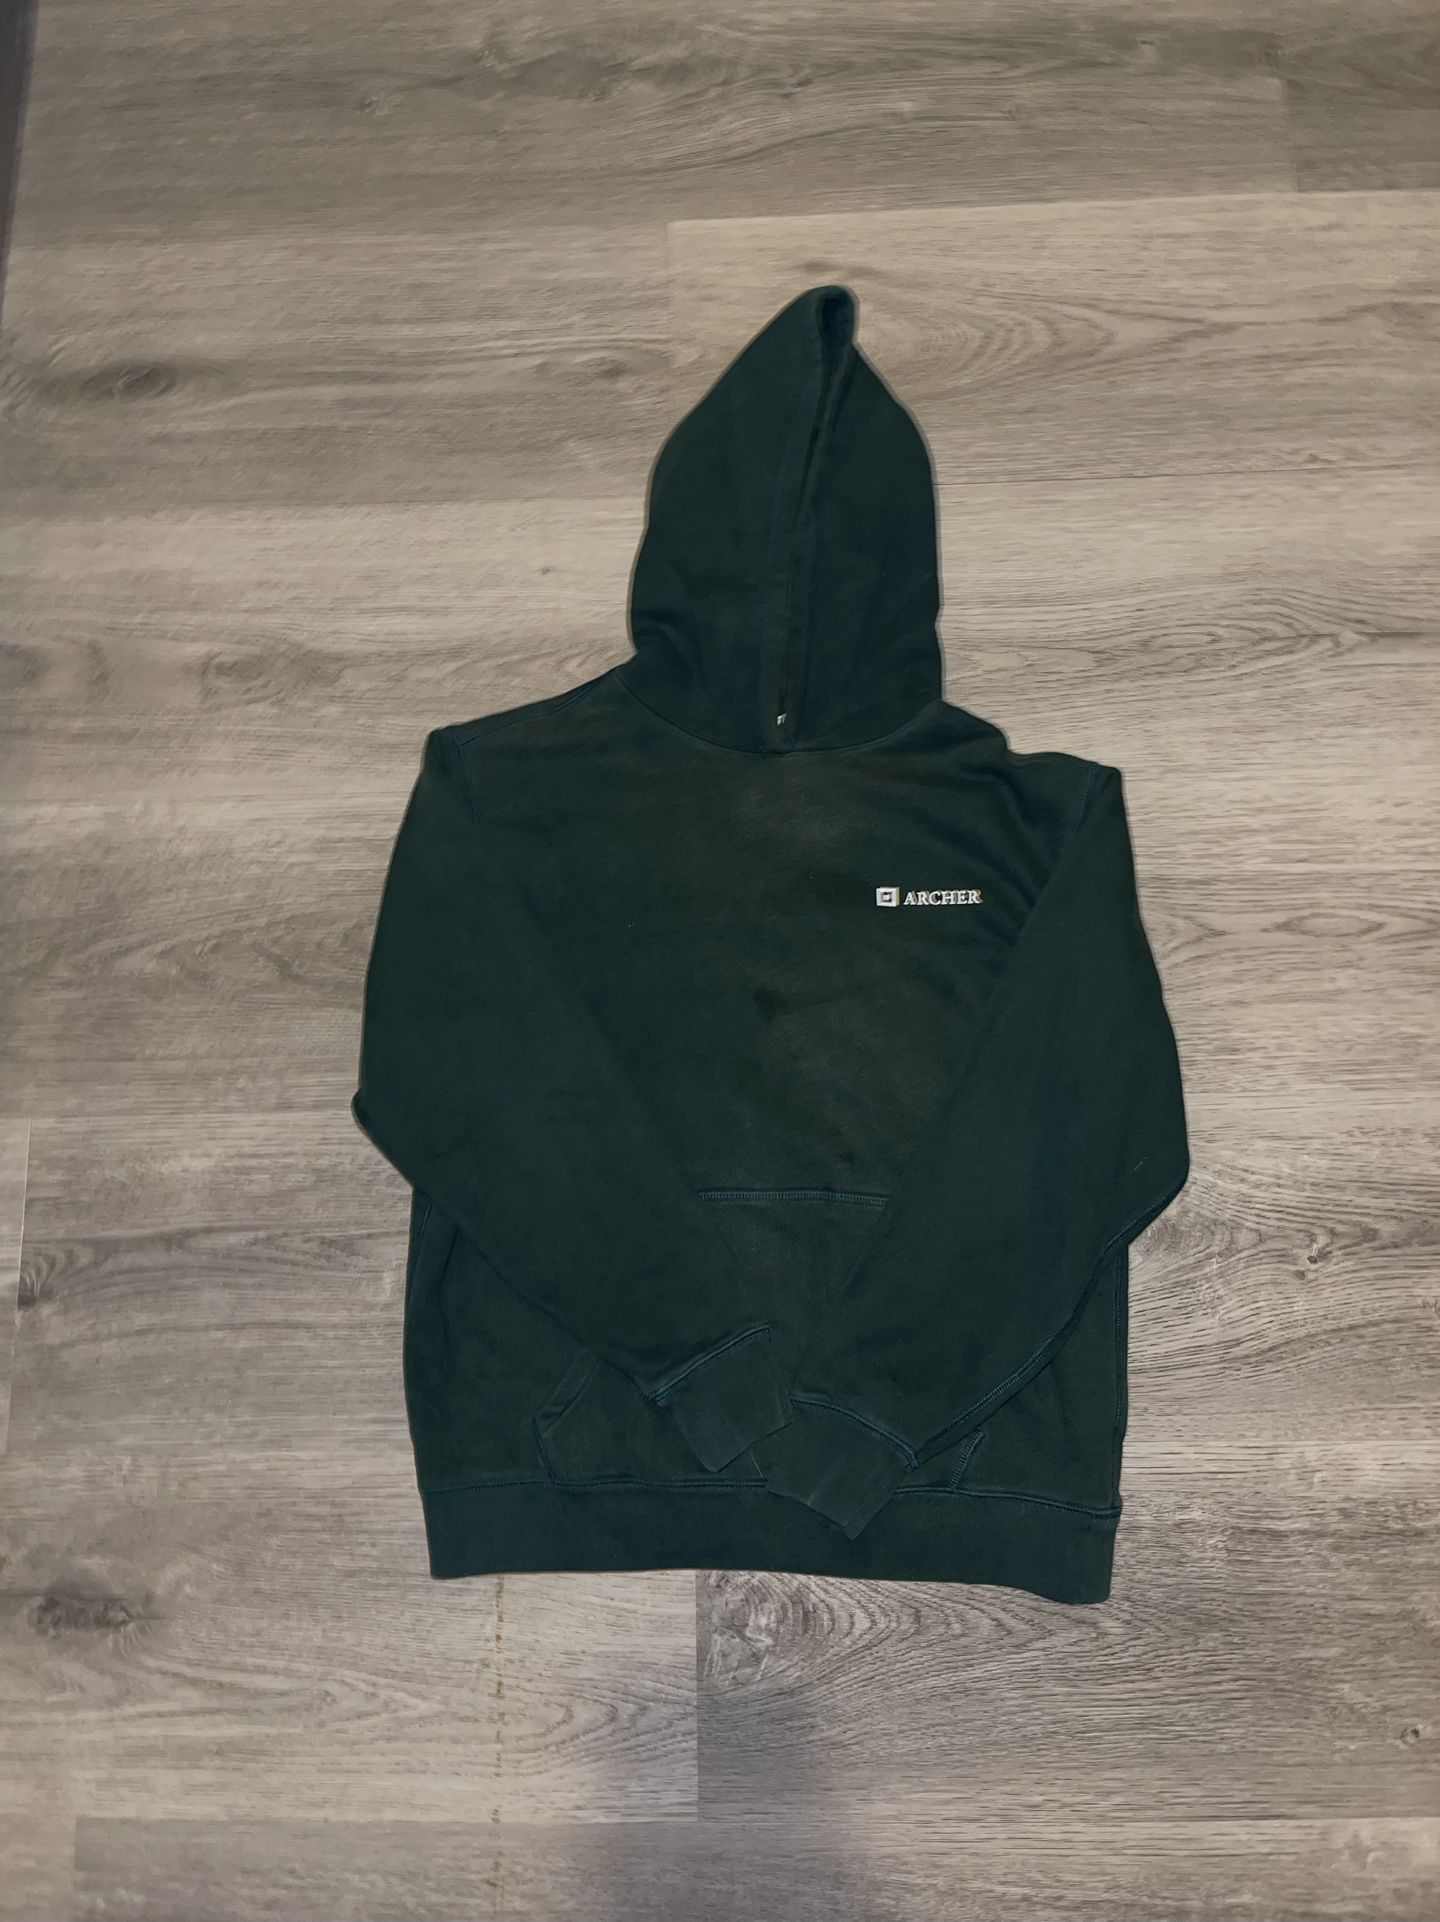 GUCCI x adidas COLLECTION** Black Hooded Seatshirt for Sale in Los Angeles,  CA - OfferUp